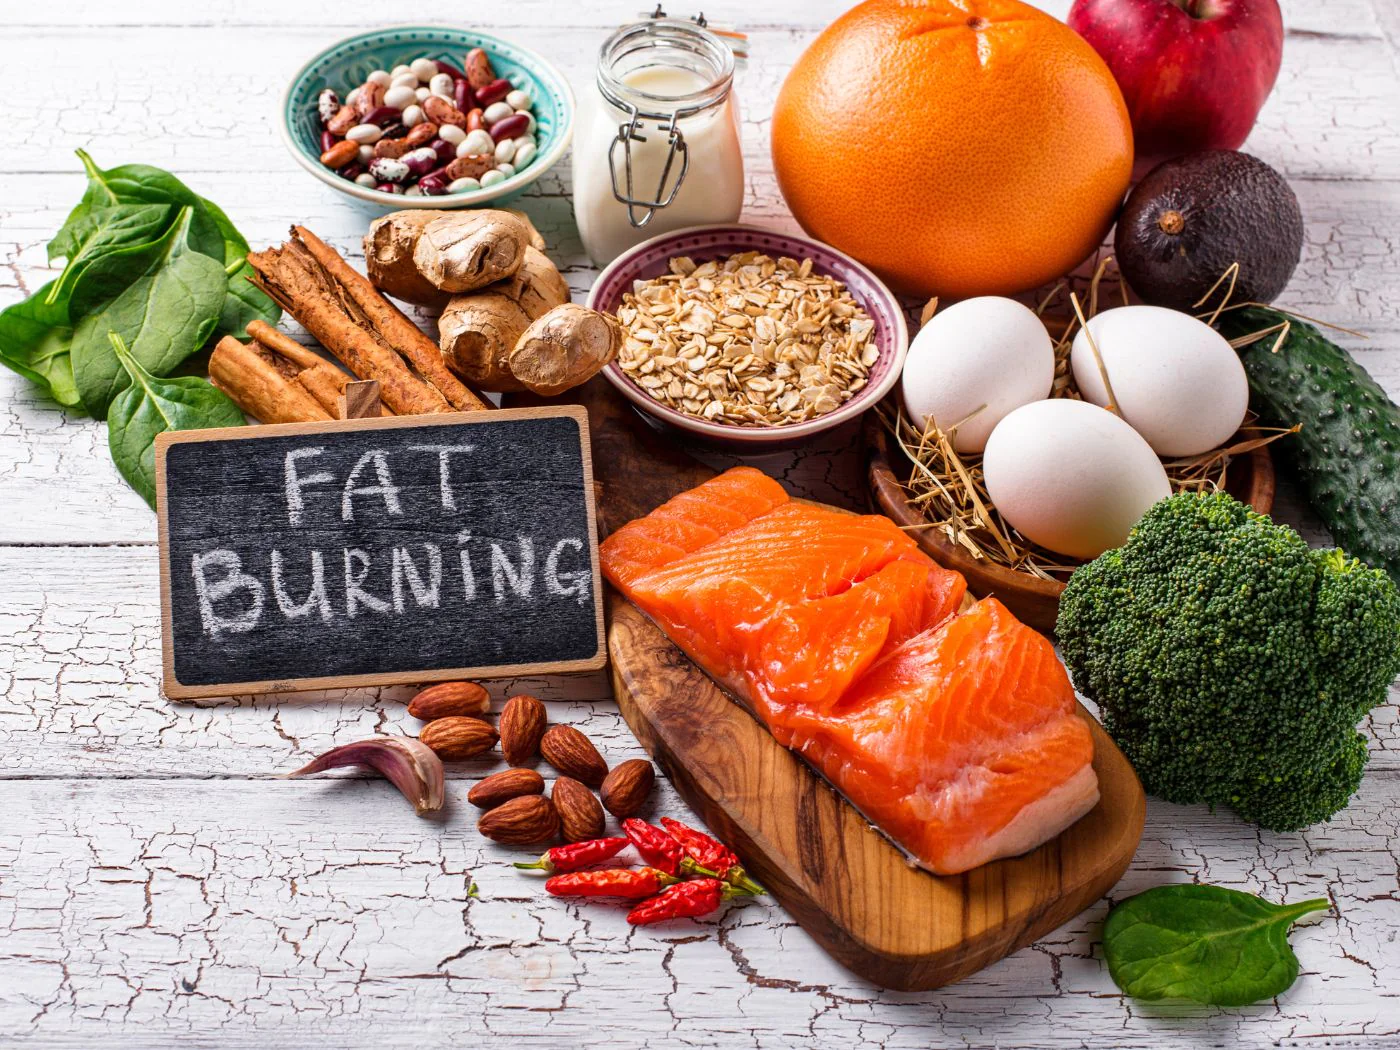 The Greatest Food for Burning Fat to Lose Weight